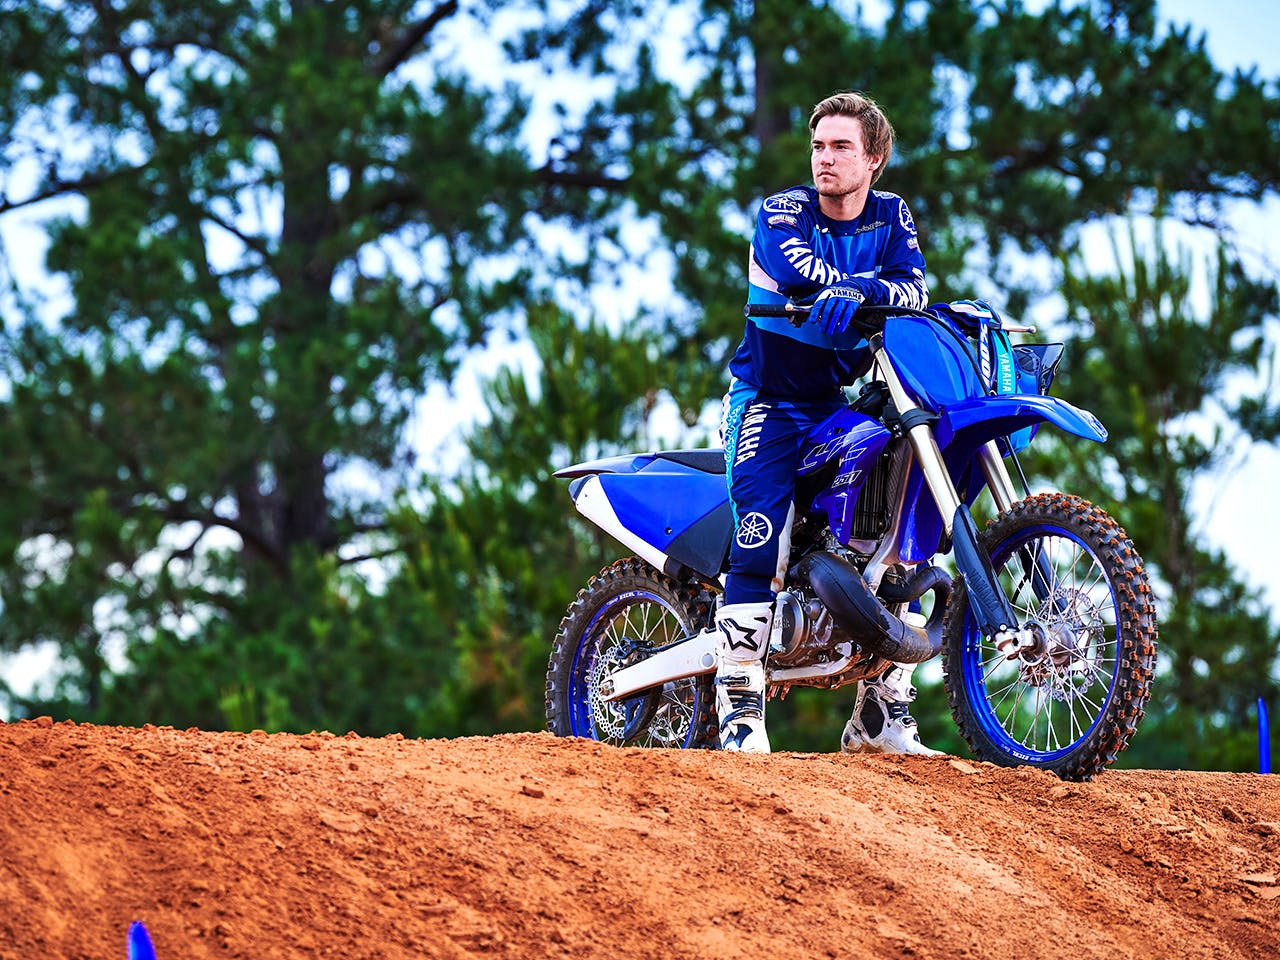 Yamaha YZ250 in team yamaha blue colour, being ridden off-track